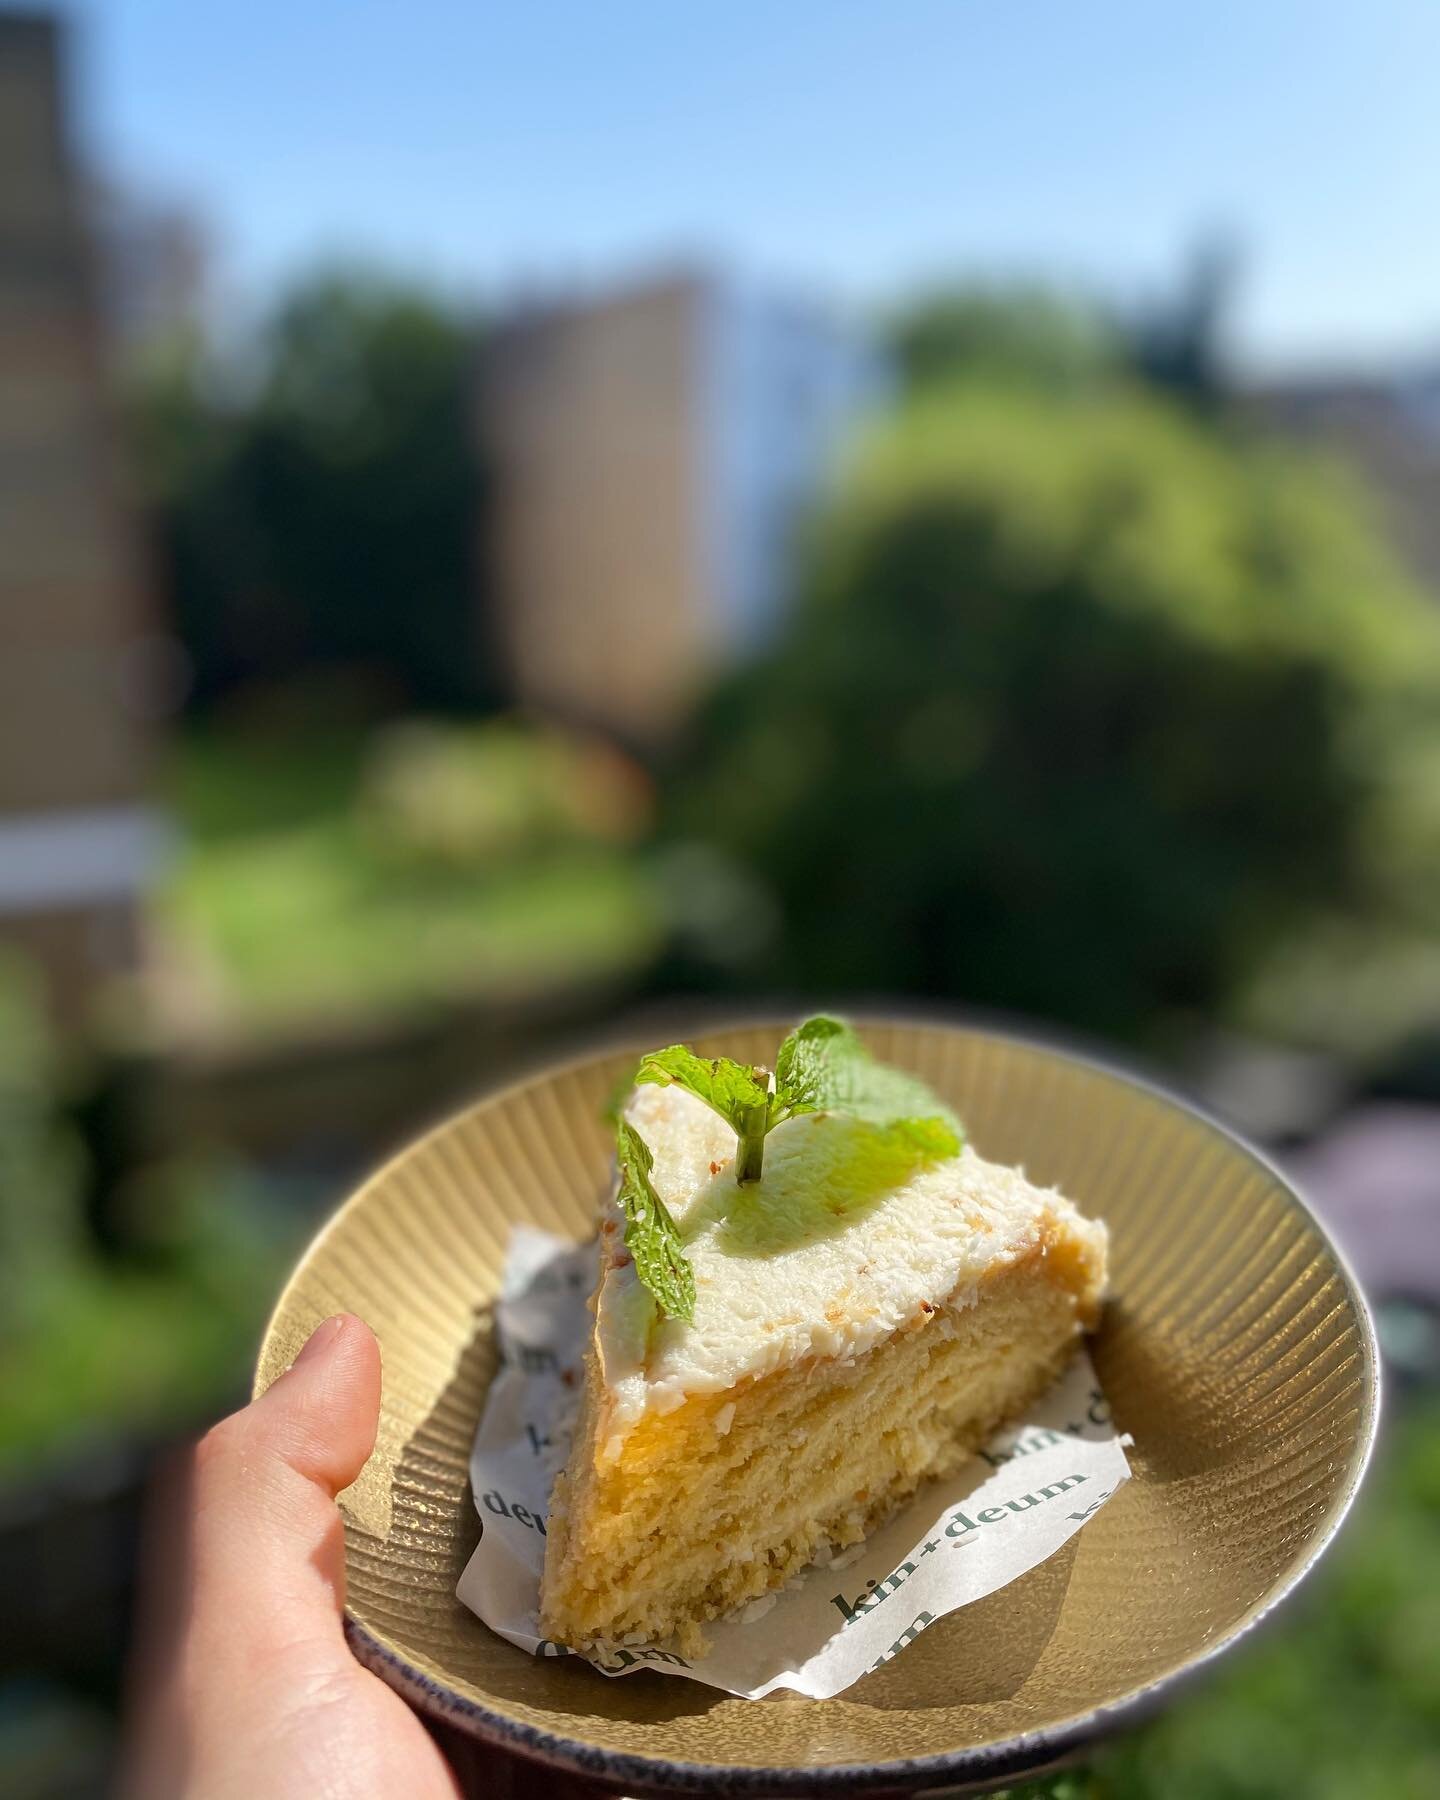 Coconut Cake from paradise - baked in our kitchen fresh everyday. Gluten-free, no refined sugars and very light 🥥 🍰👌🏻

https://www.kindeum.com/
.
.
.
.
.
#architecture #art #artisan #plants #cake #bakery #thairestaurant #londonrestaurants #ootd #